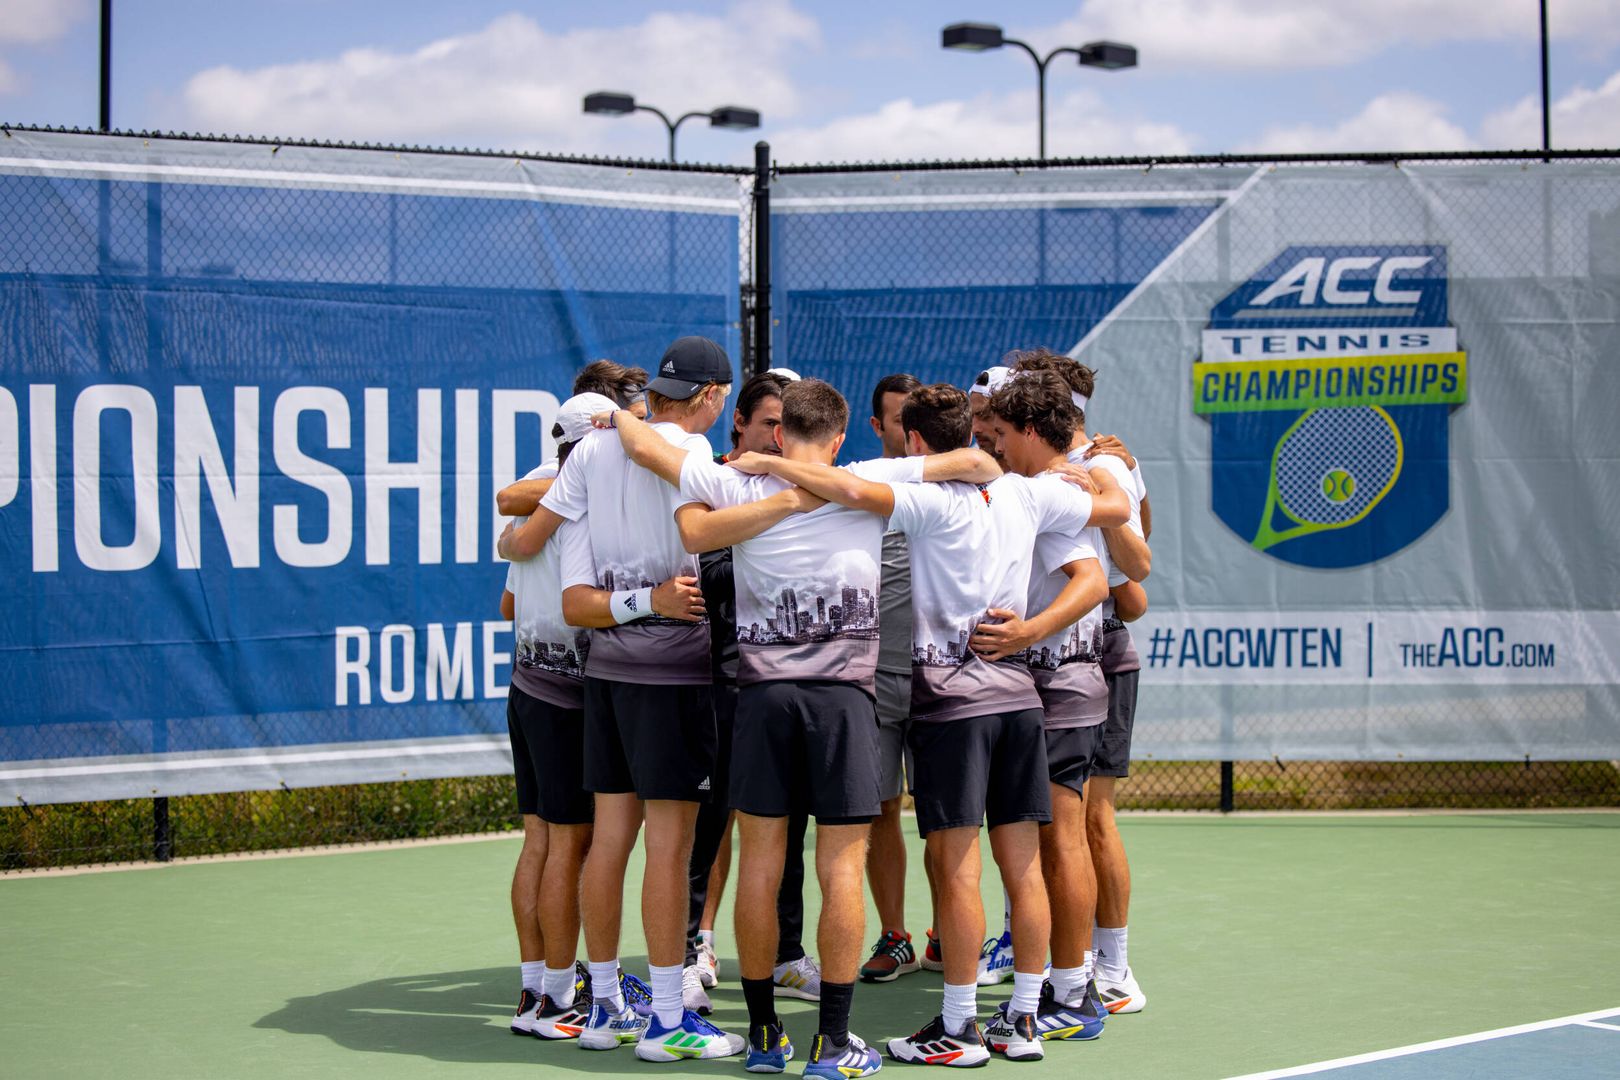 Hurricanes Fall In Second Round of ACC Championships